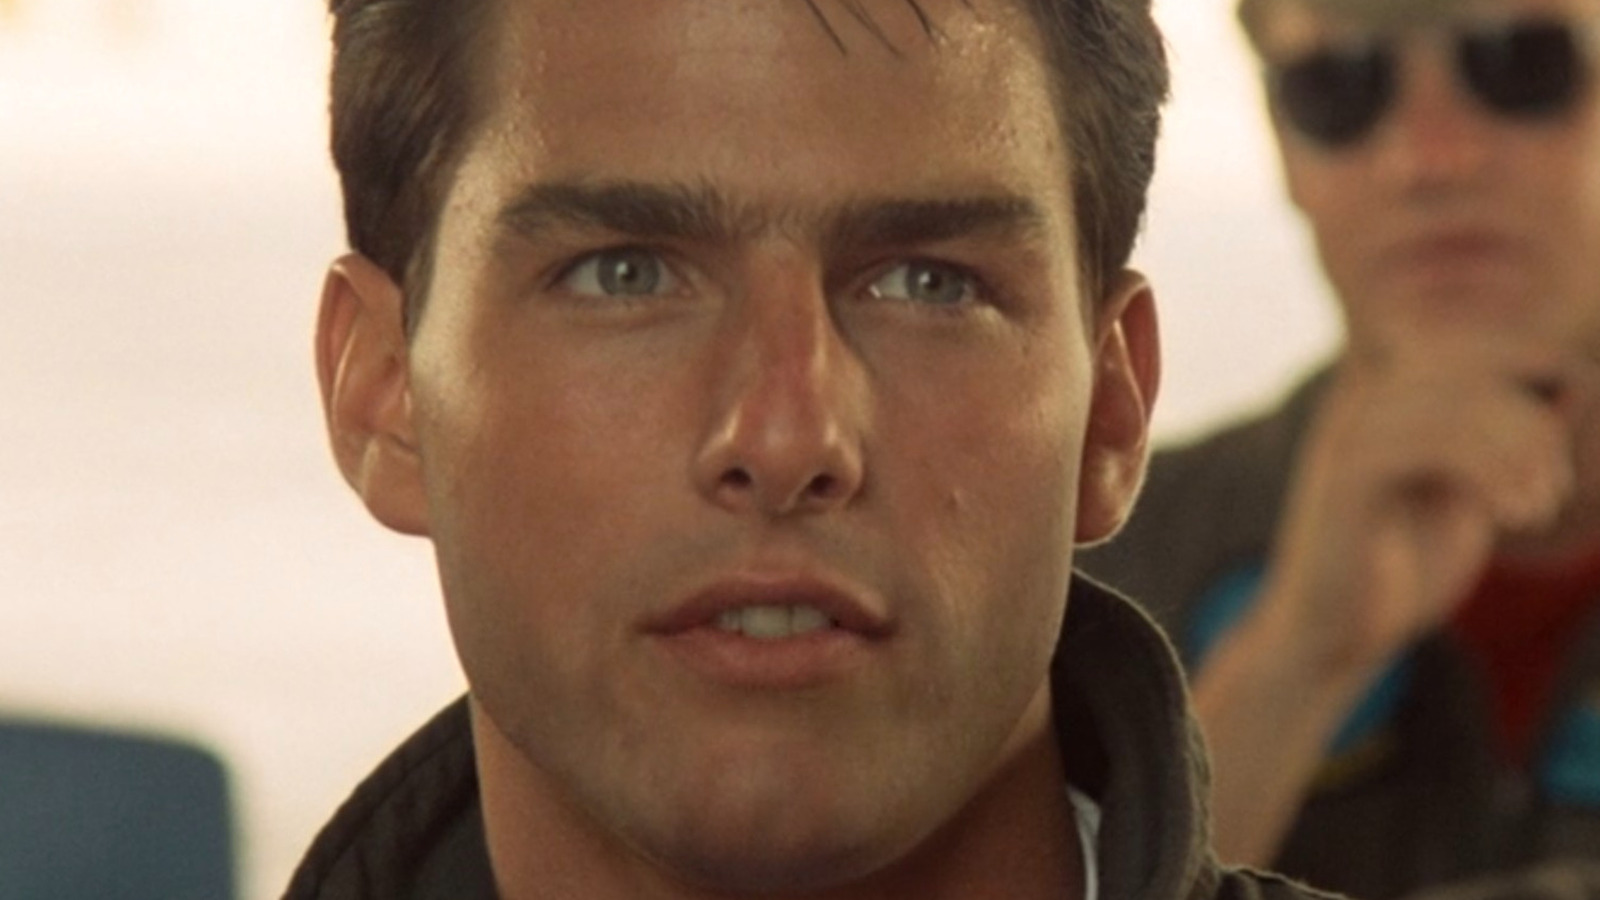 håndled mor At tilpasse sig How Top Gun's Famous Volleyball Scene Almost Got The Director Fired